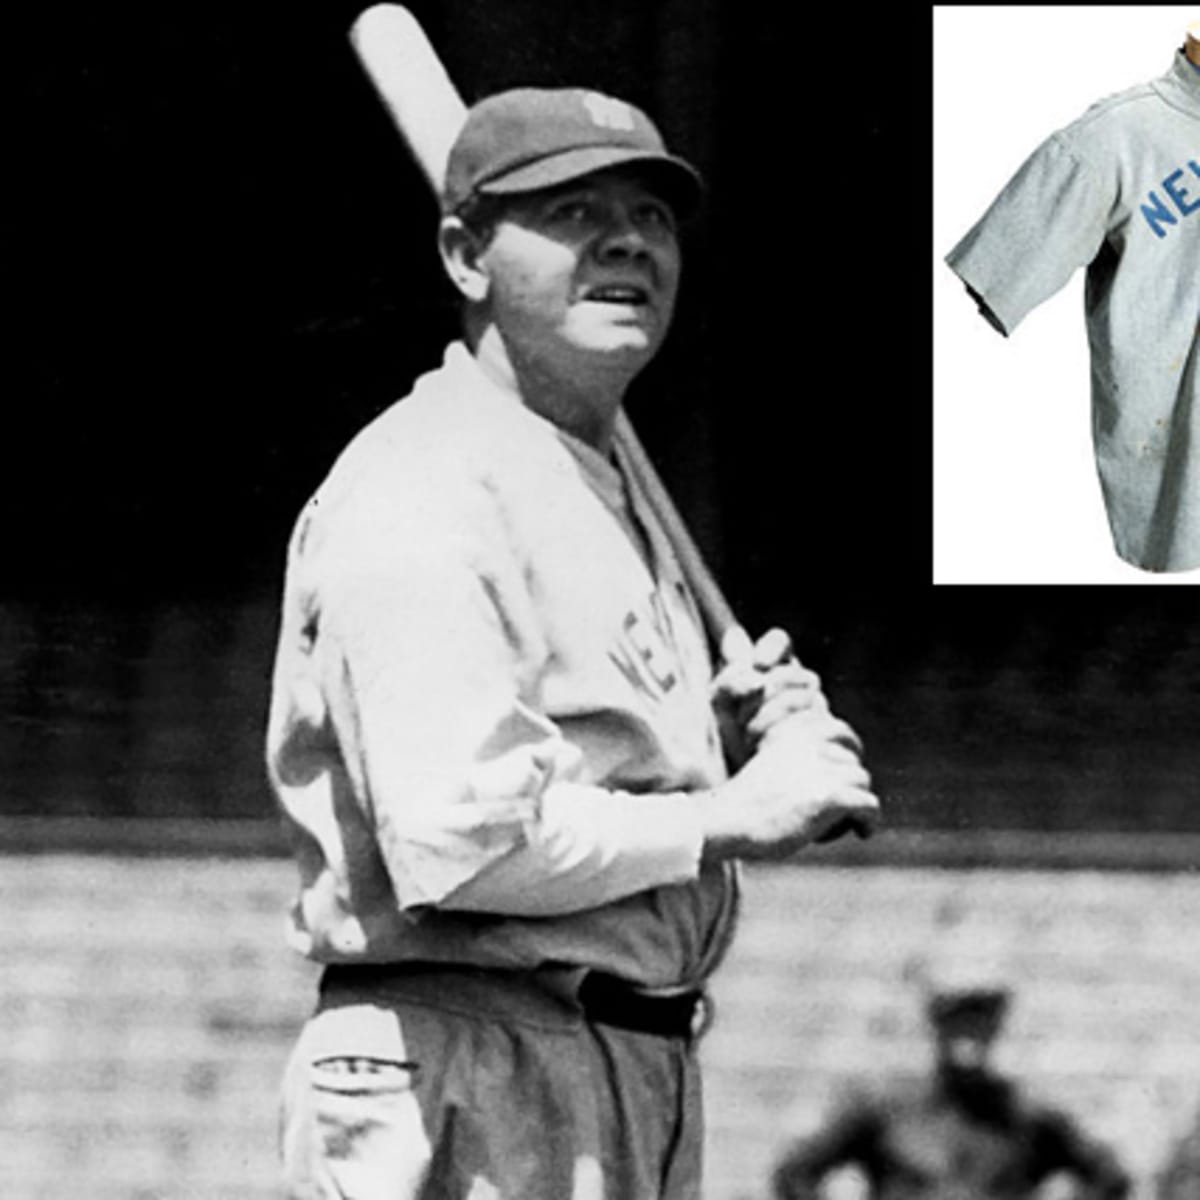 RECORD! A Babe Ruth Game-Worn Jersey Sold for $4.4 Million in 2012